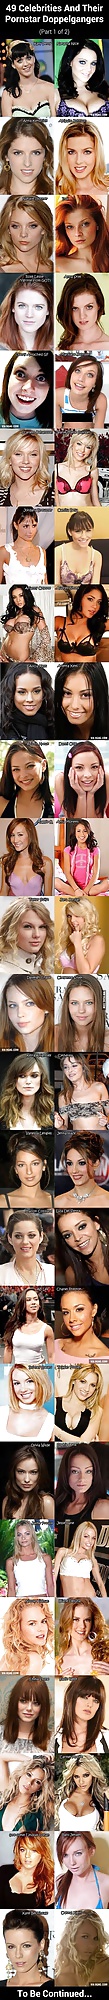 49 celebrities and the porn star counterparts  #28847959